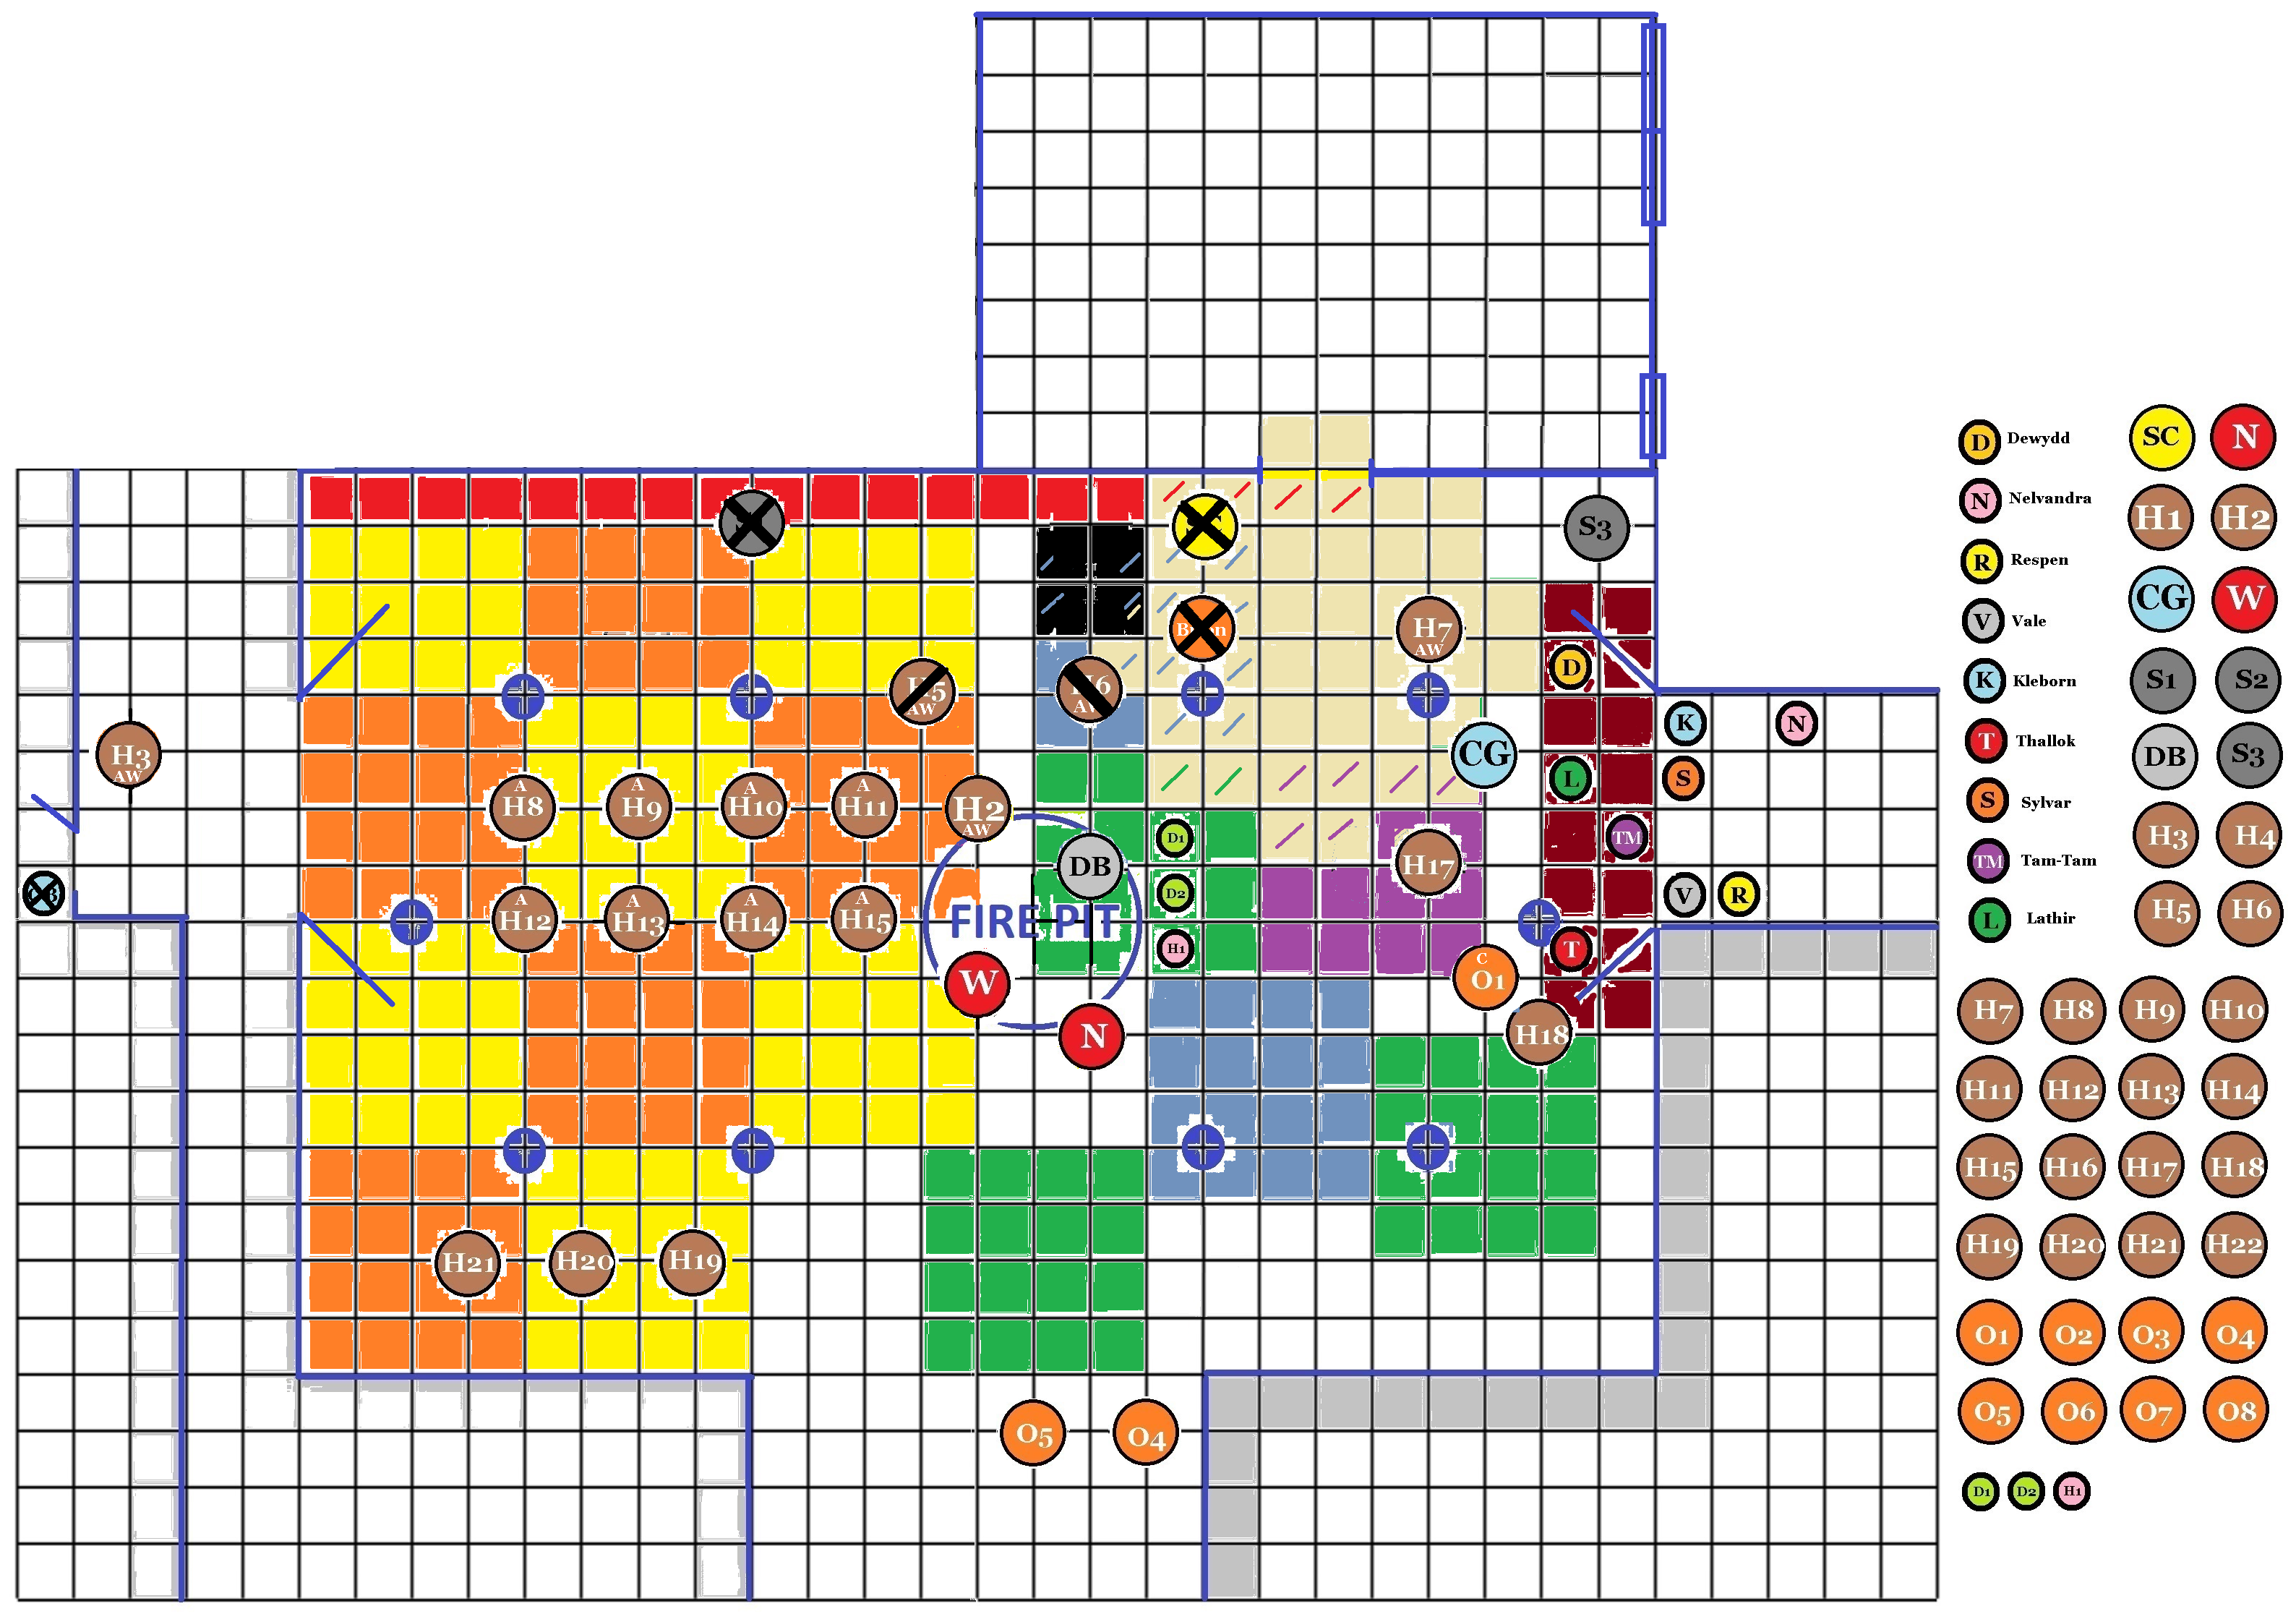 00-Big-Battle-Map-Giant-Great-Hall-001k6.png